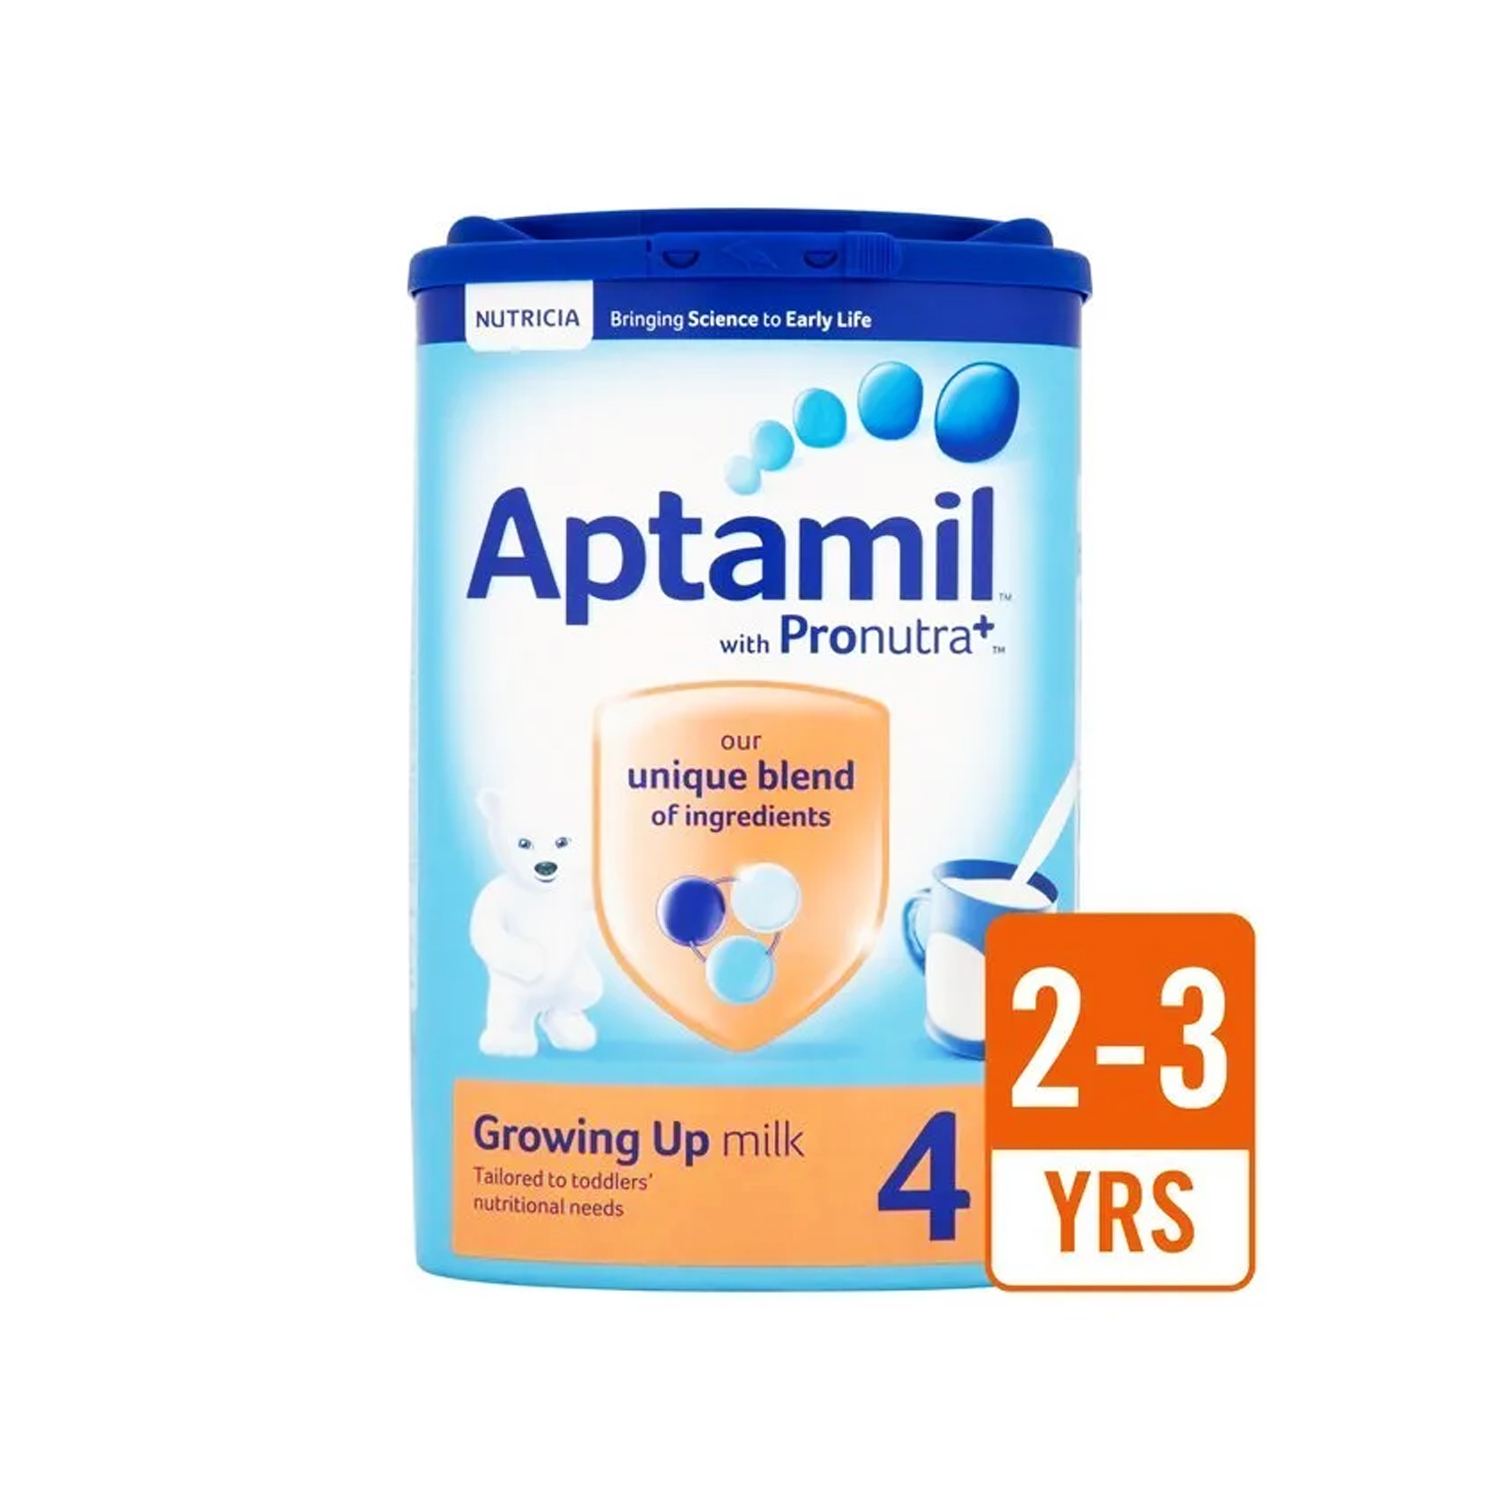 Buy Aptamil Stage 4 Growing Up Milk Powder for ₹3087 best offer price online from cureka